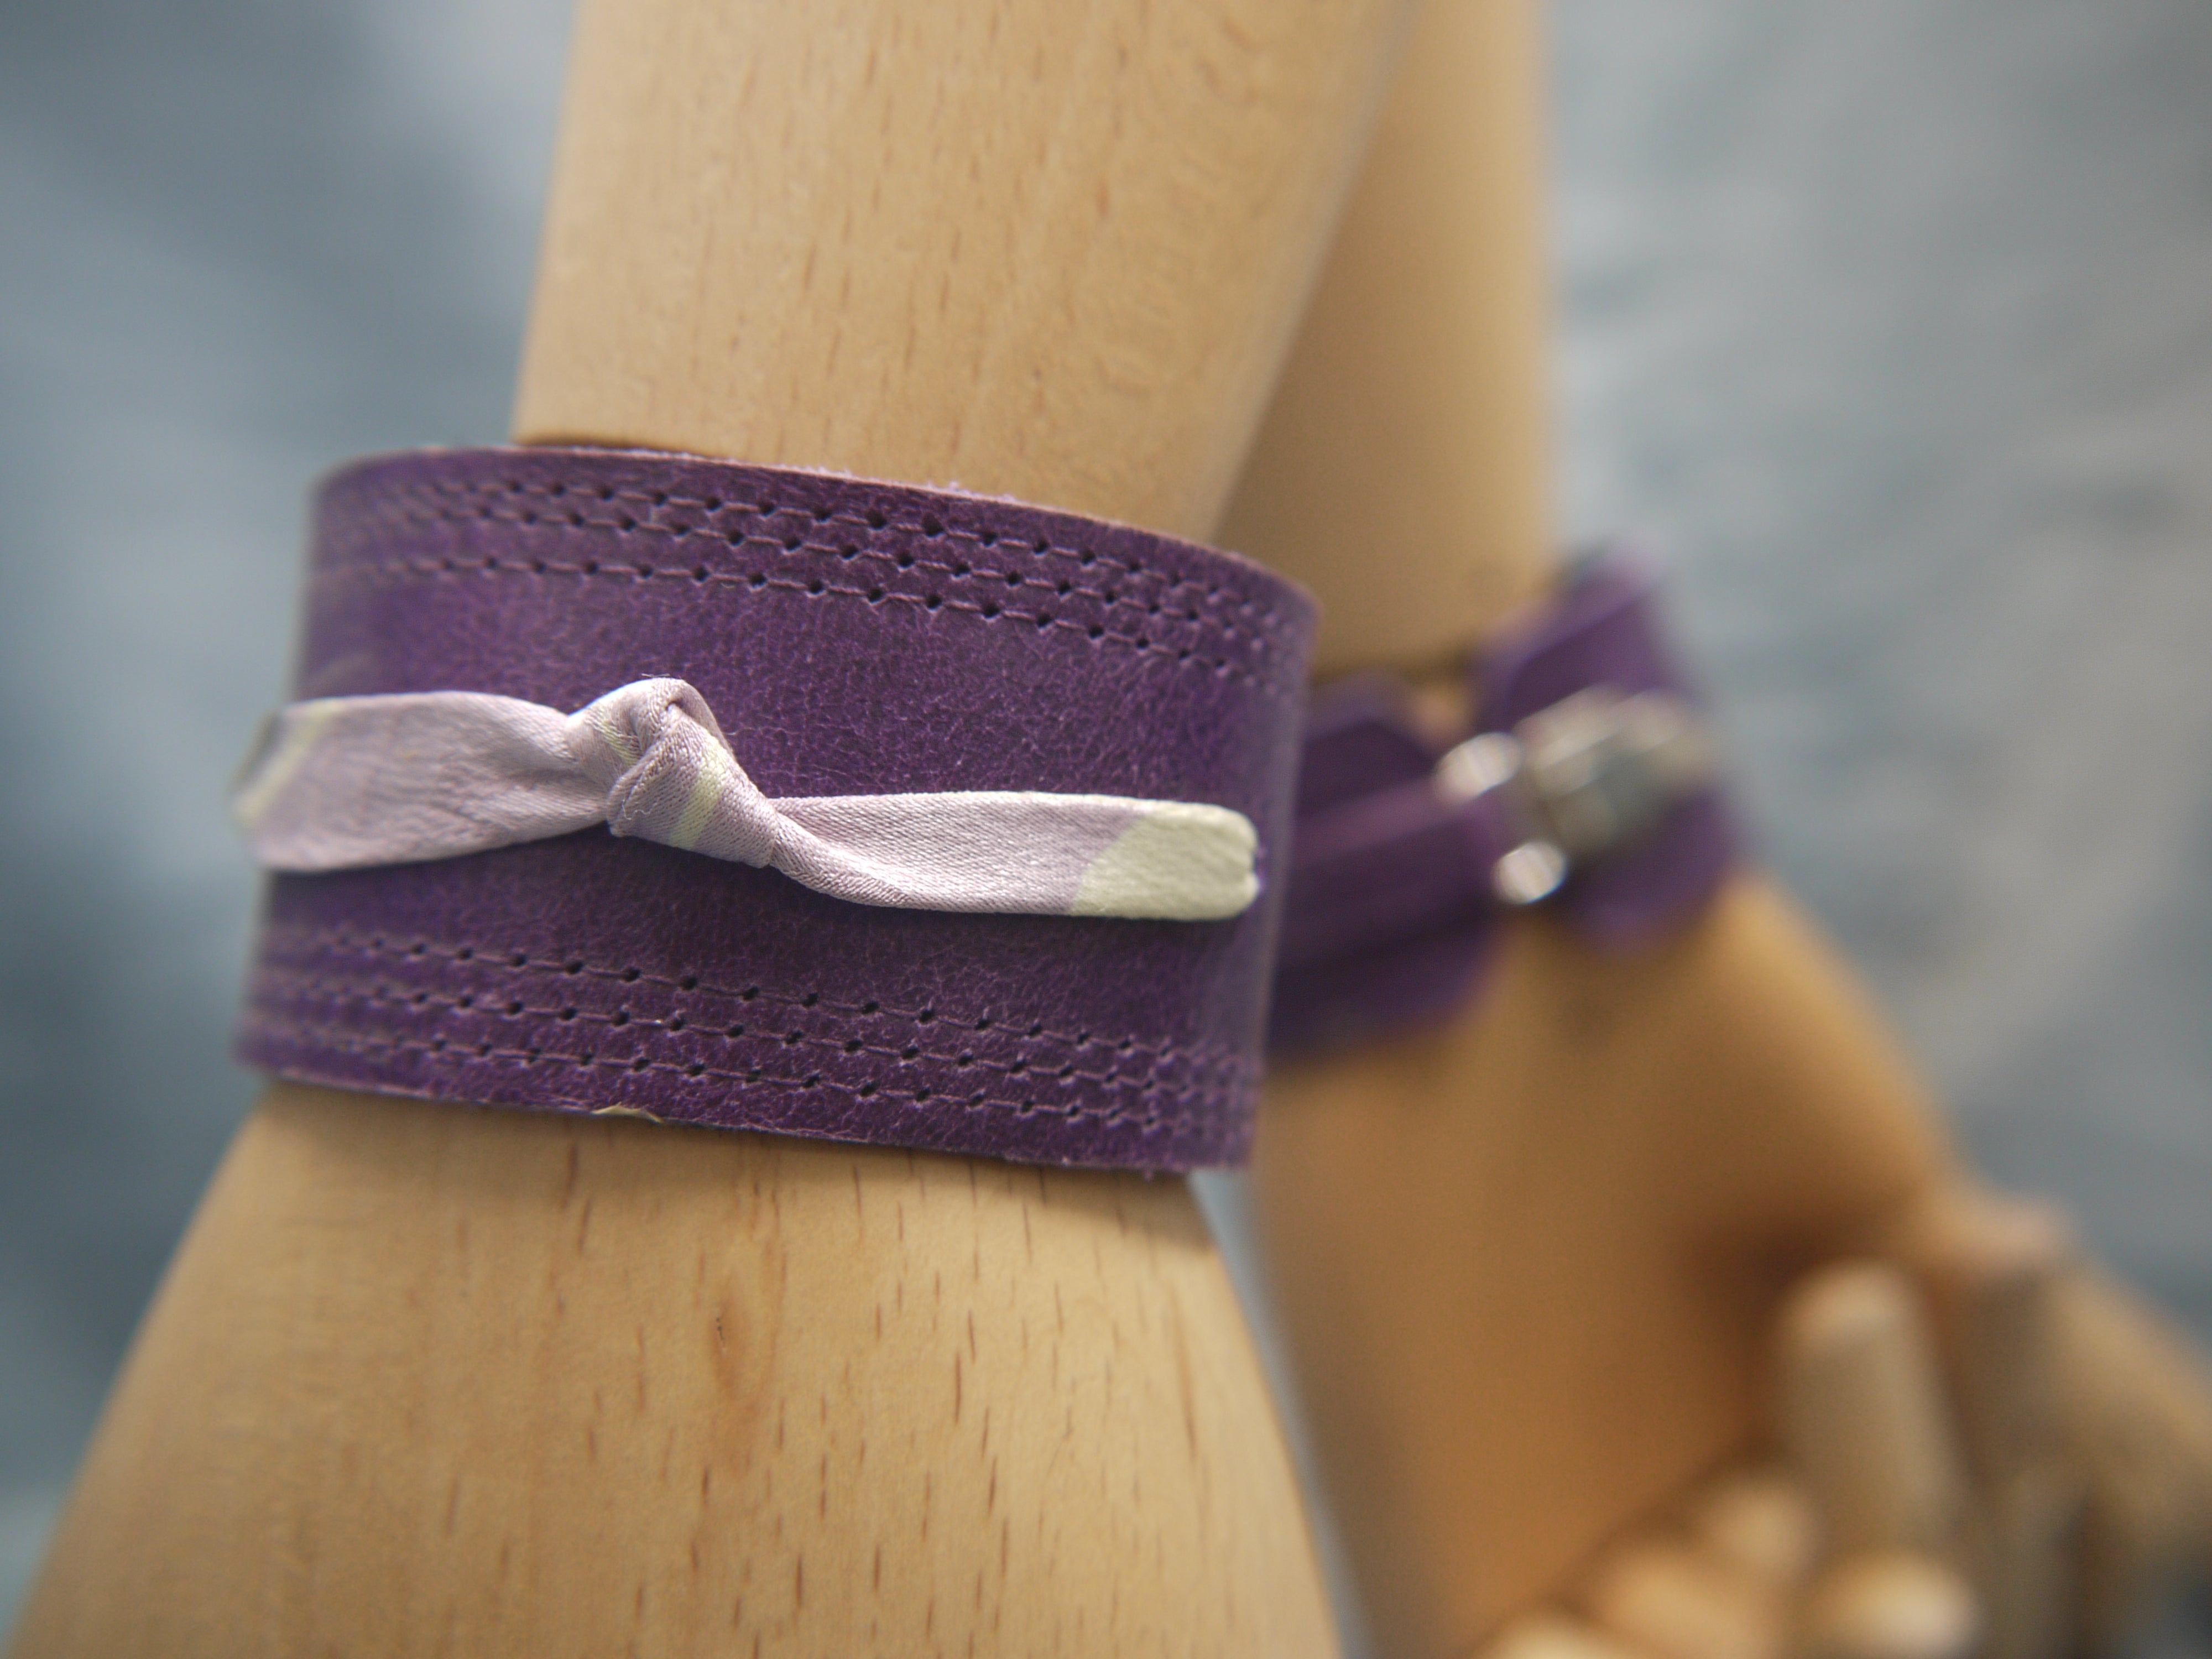 Royal Purple slimline Italian leather cuff with lilac slim silk knot central on the cuff. The cugff has elegant repeat stitch detail around the edges. Close-Up Image. Two cuffs are shown worn, one from the front and one from the back with the clasp closure .